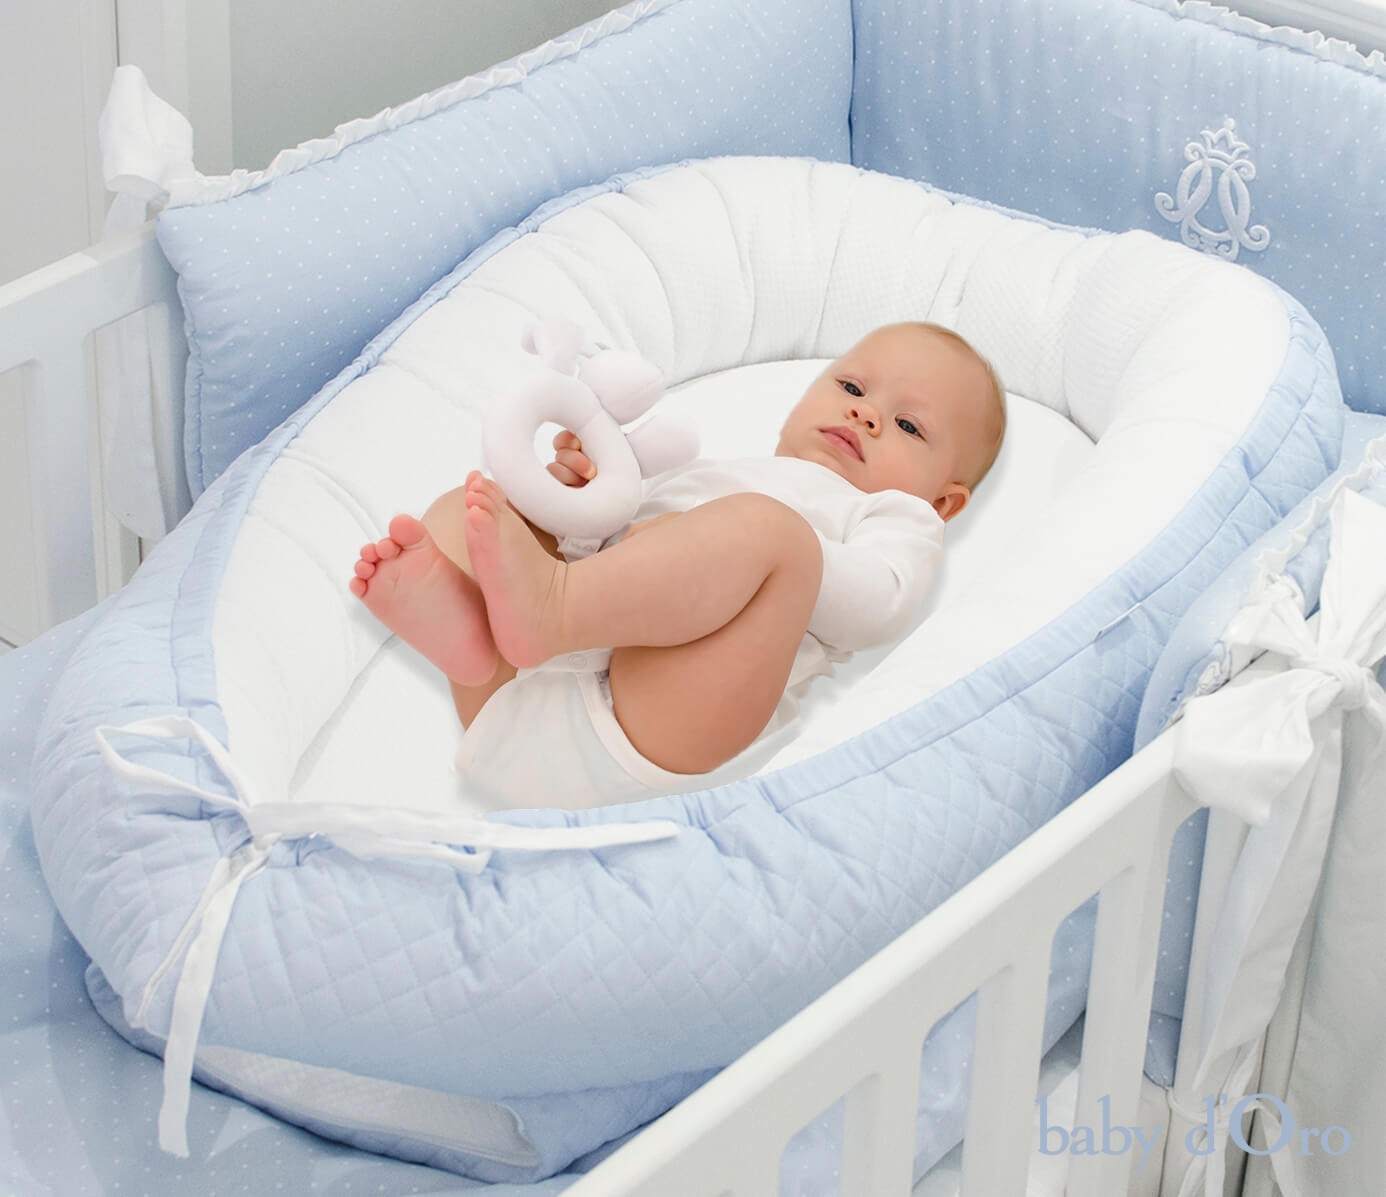 SNDMOR Baby Nest Sleep Pod Baby Blue Color In Picture